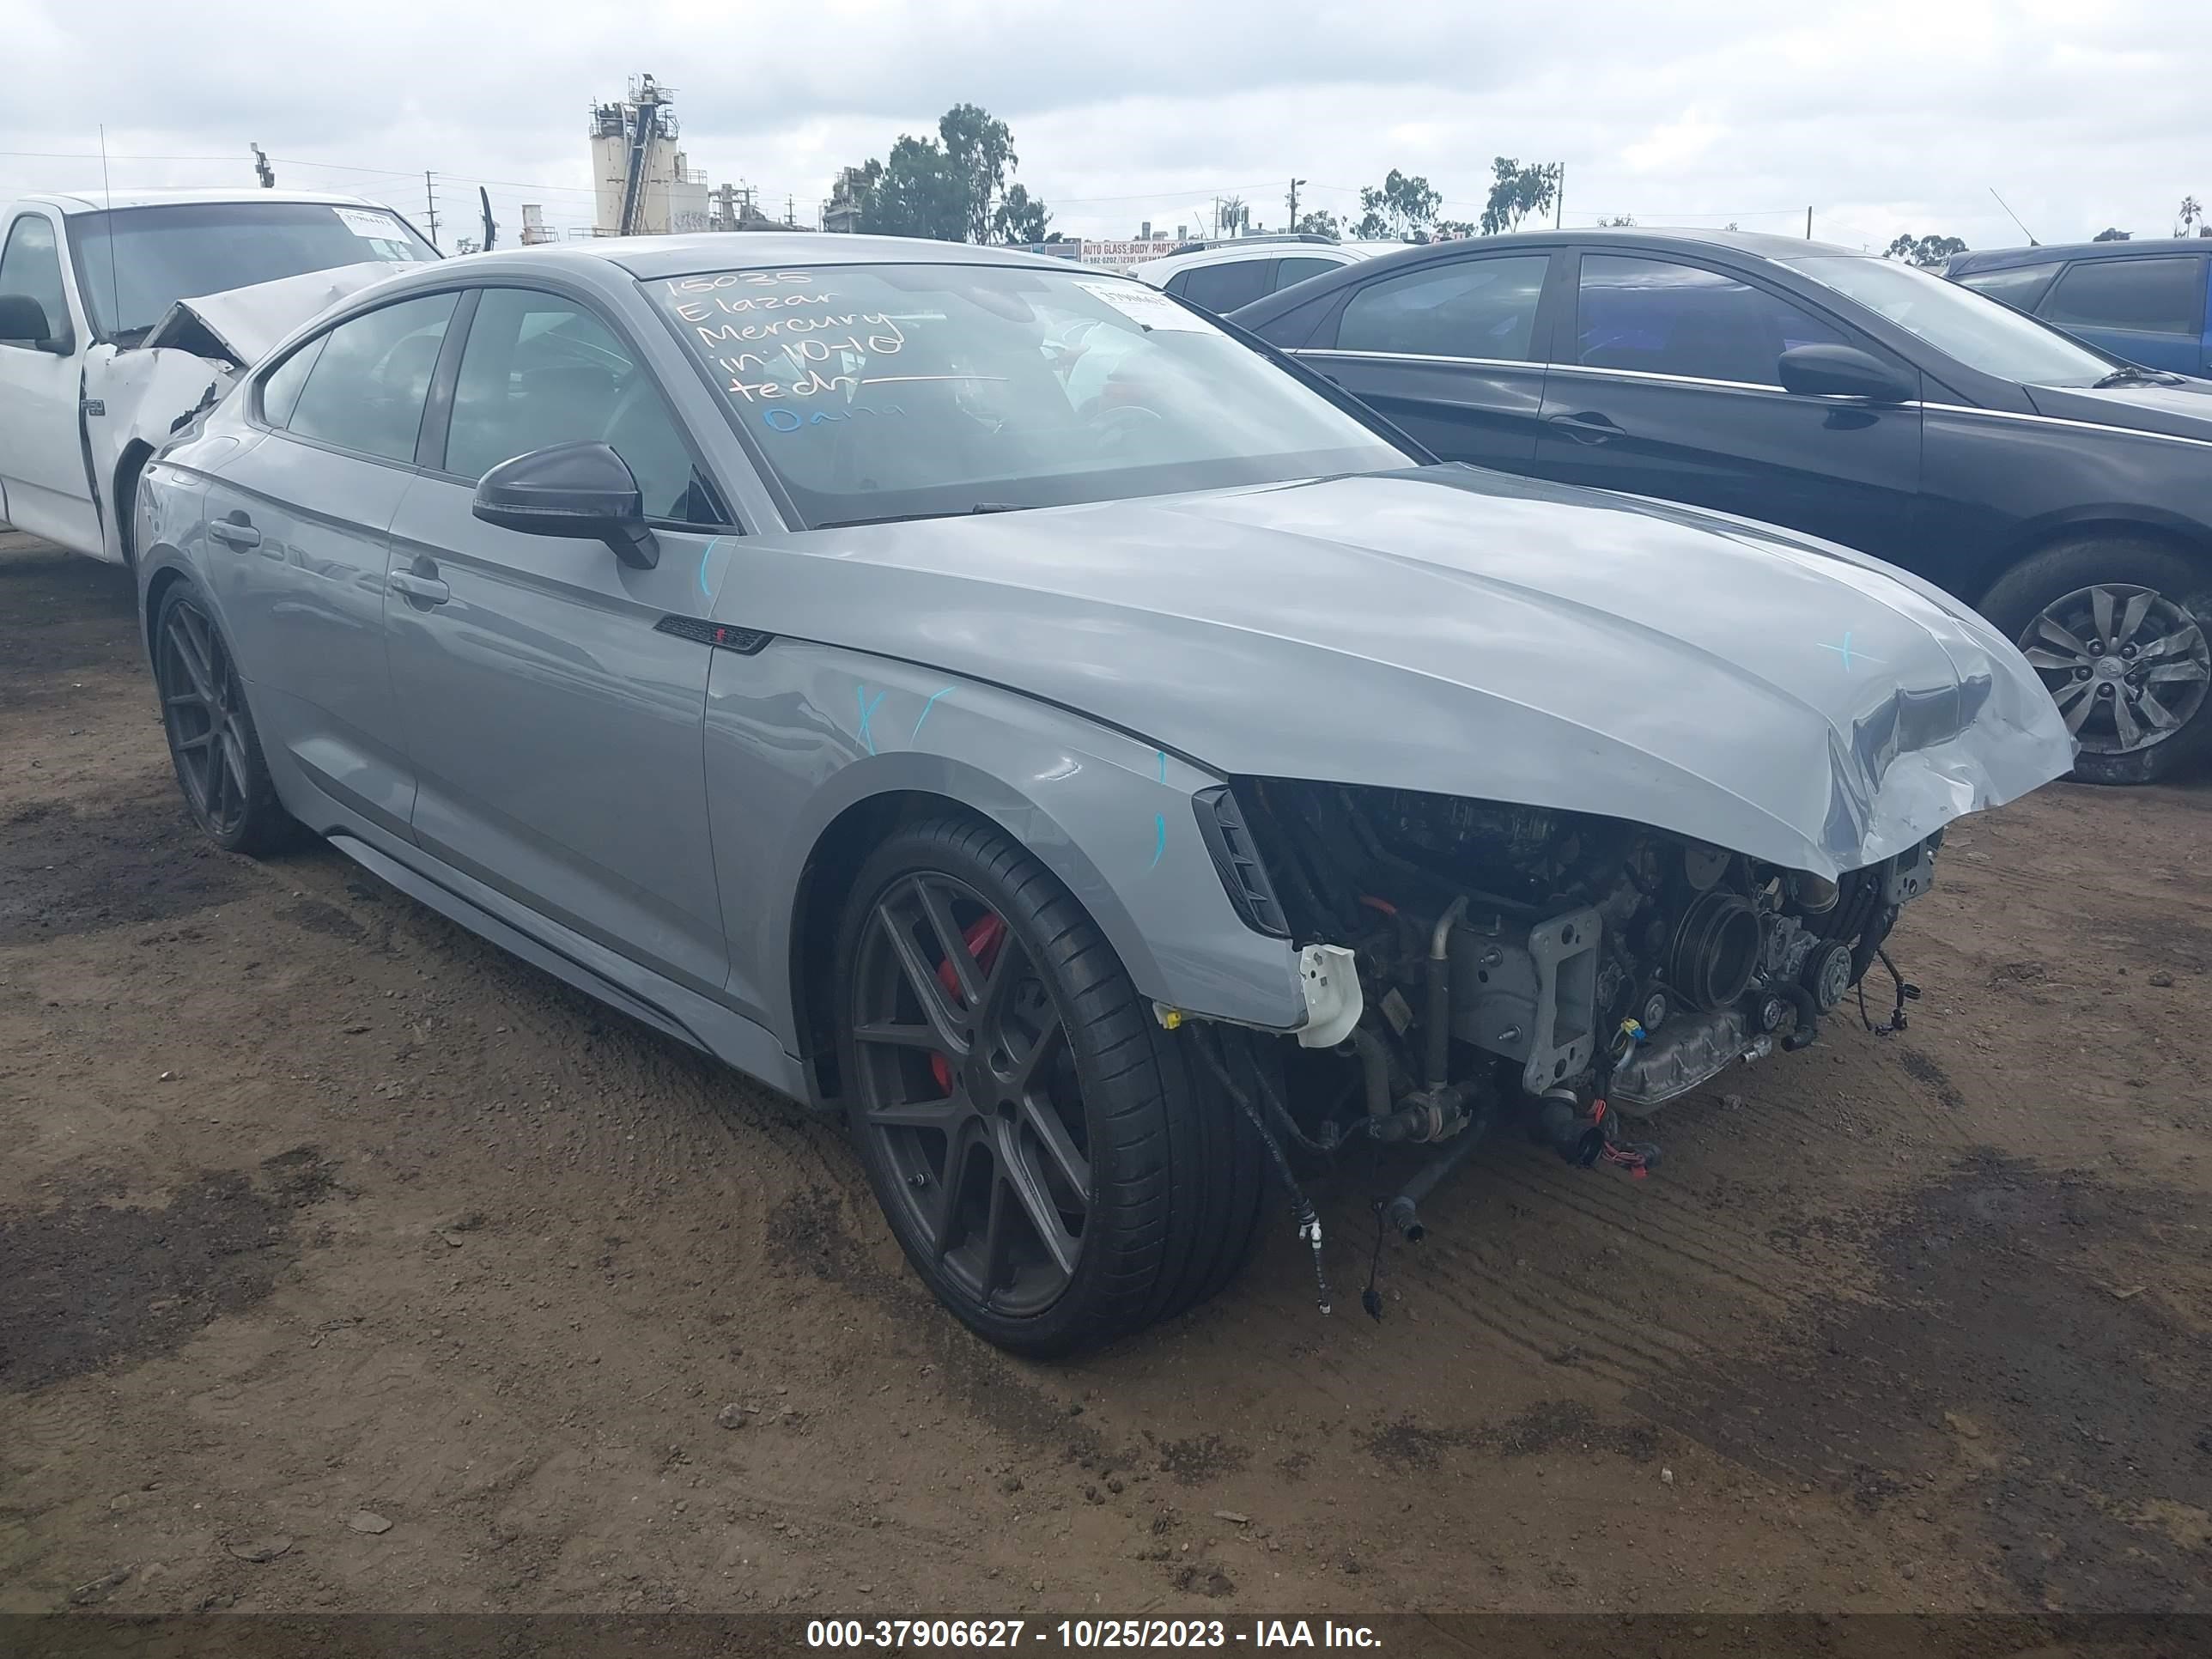 vin: WUAAWCF5XMA903122 WUAAWCF5XMA903122 2021 audi rs5 2900 for Sale in 91605, 7245 Laurel Canyon Blvd, Los Angeles, USA